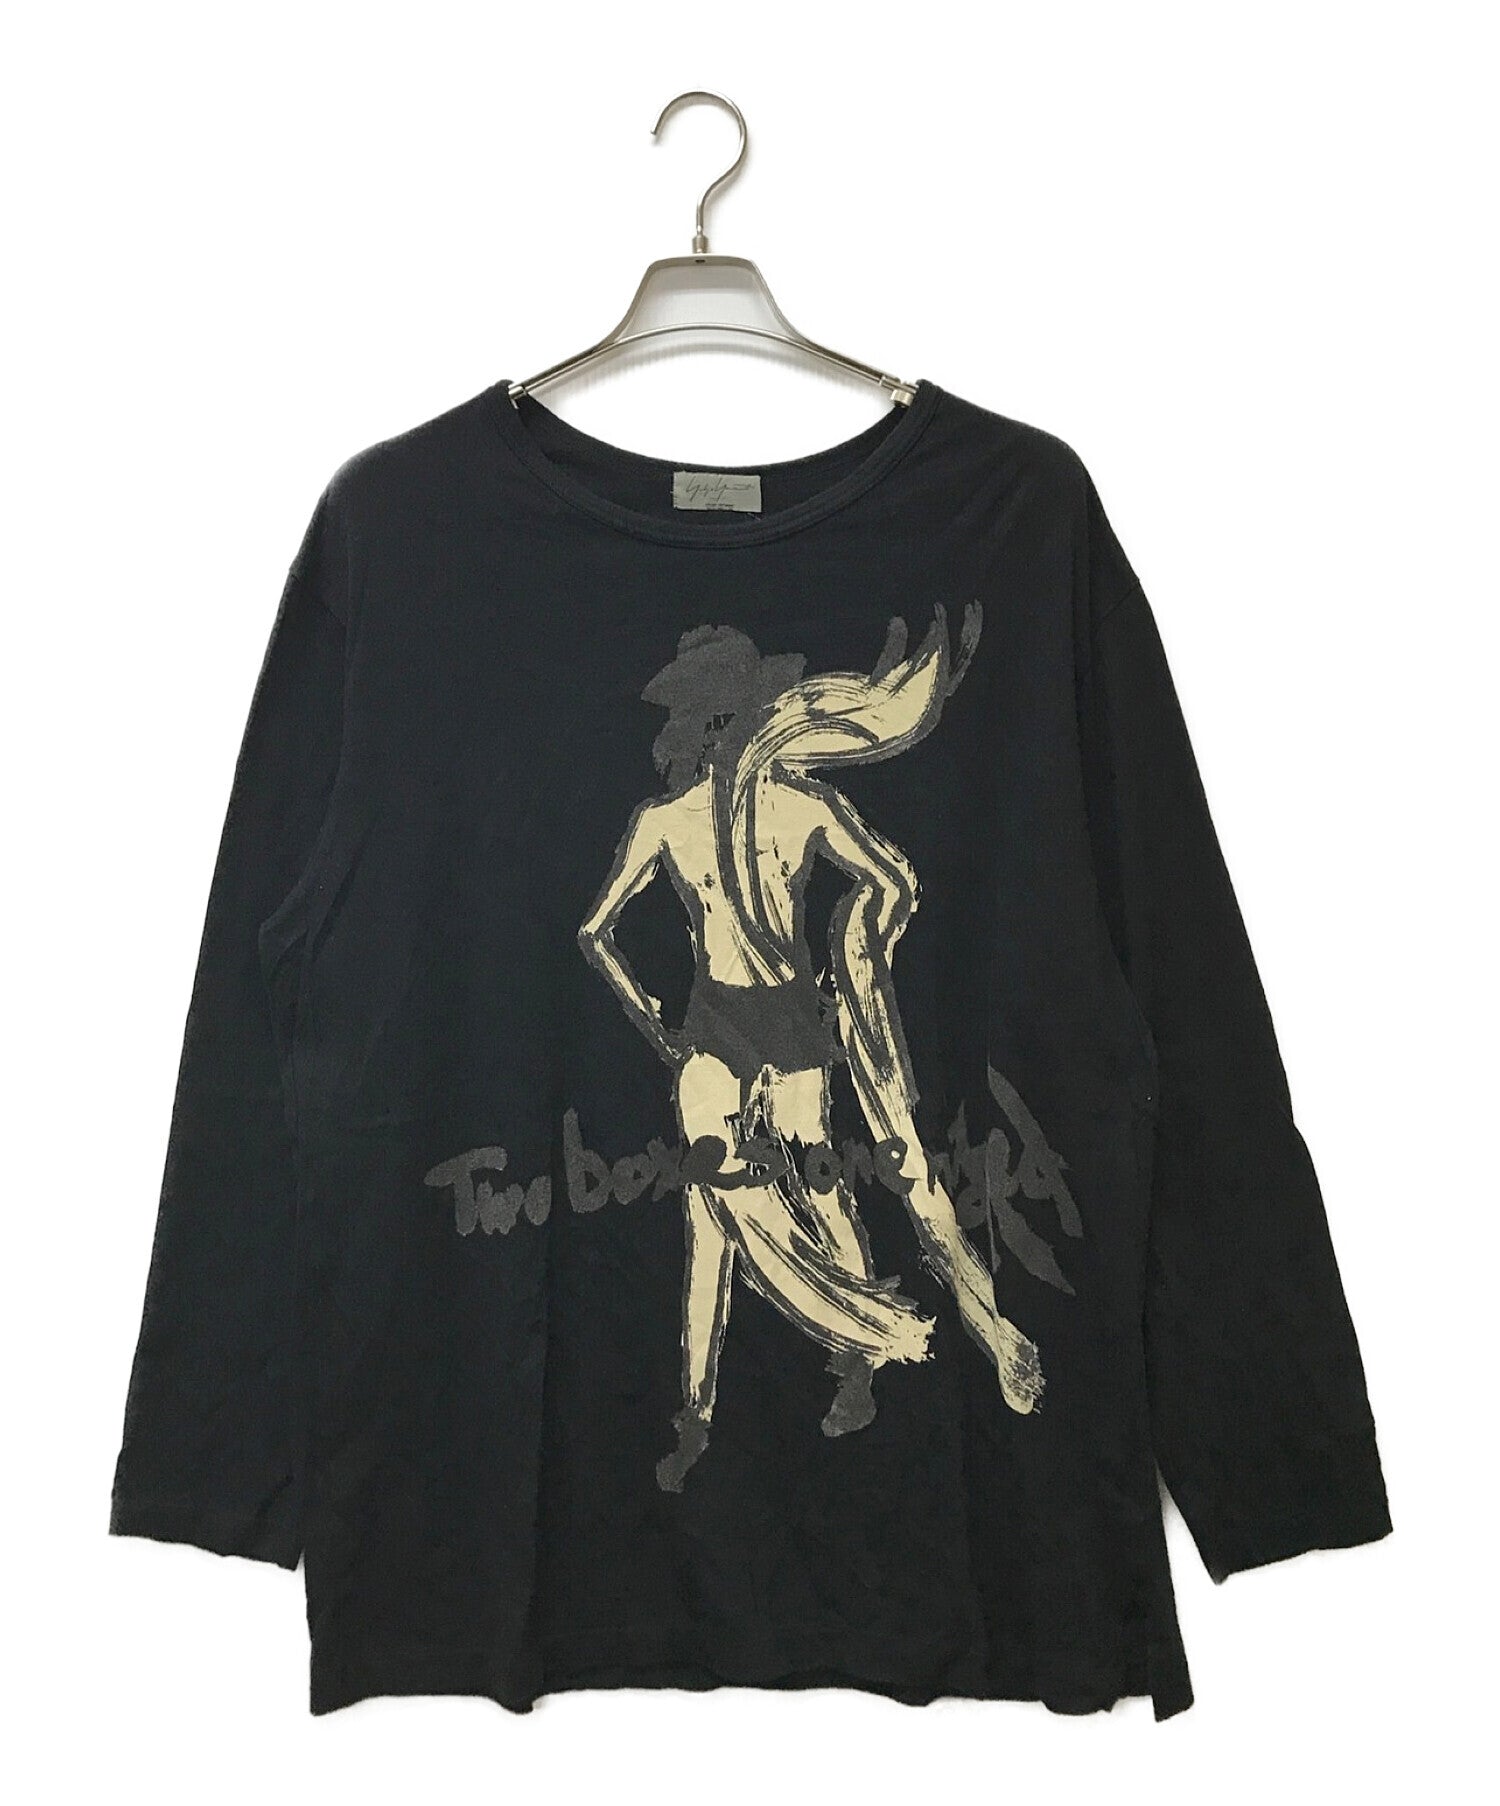 Pre-owned] Yohji Yamamoto pour homme Two boxes one night print L/S 